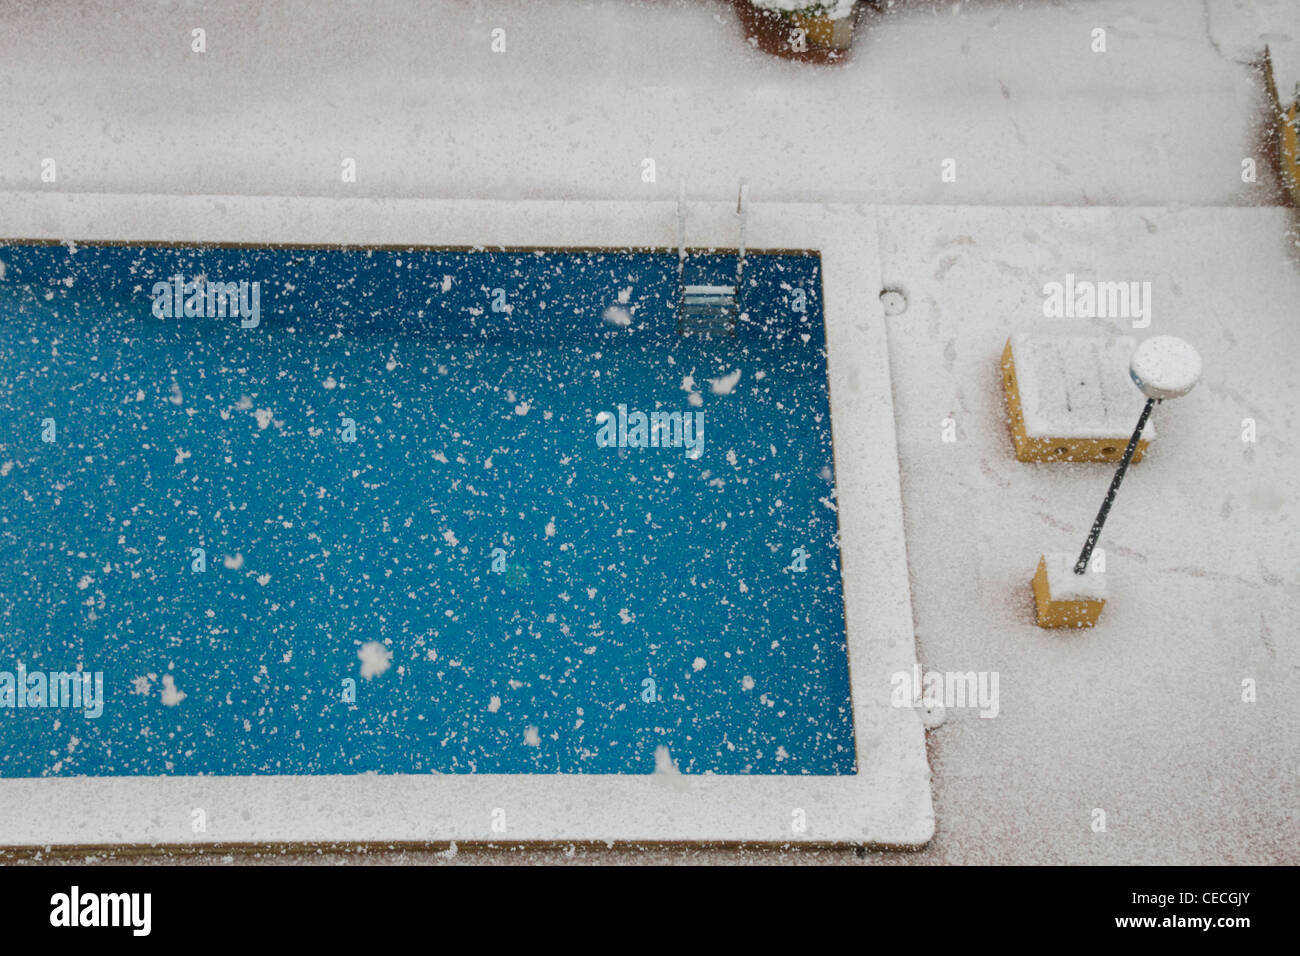 Swimming pool snowing outdoor detail Stock Photo